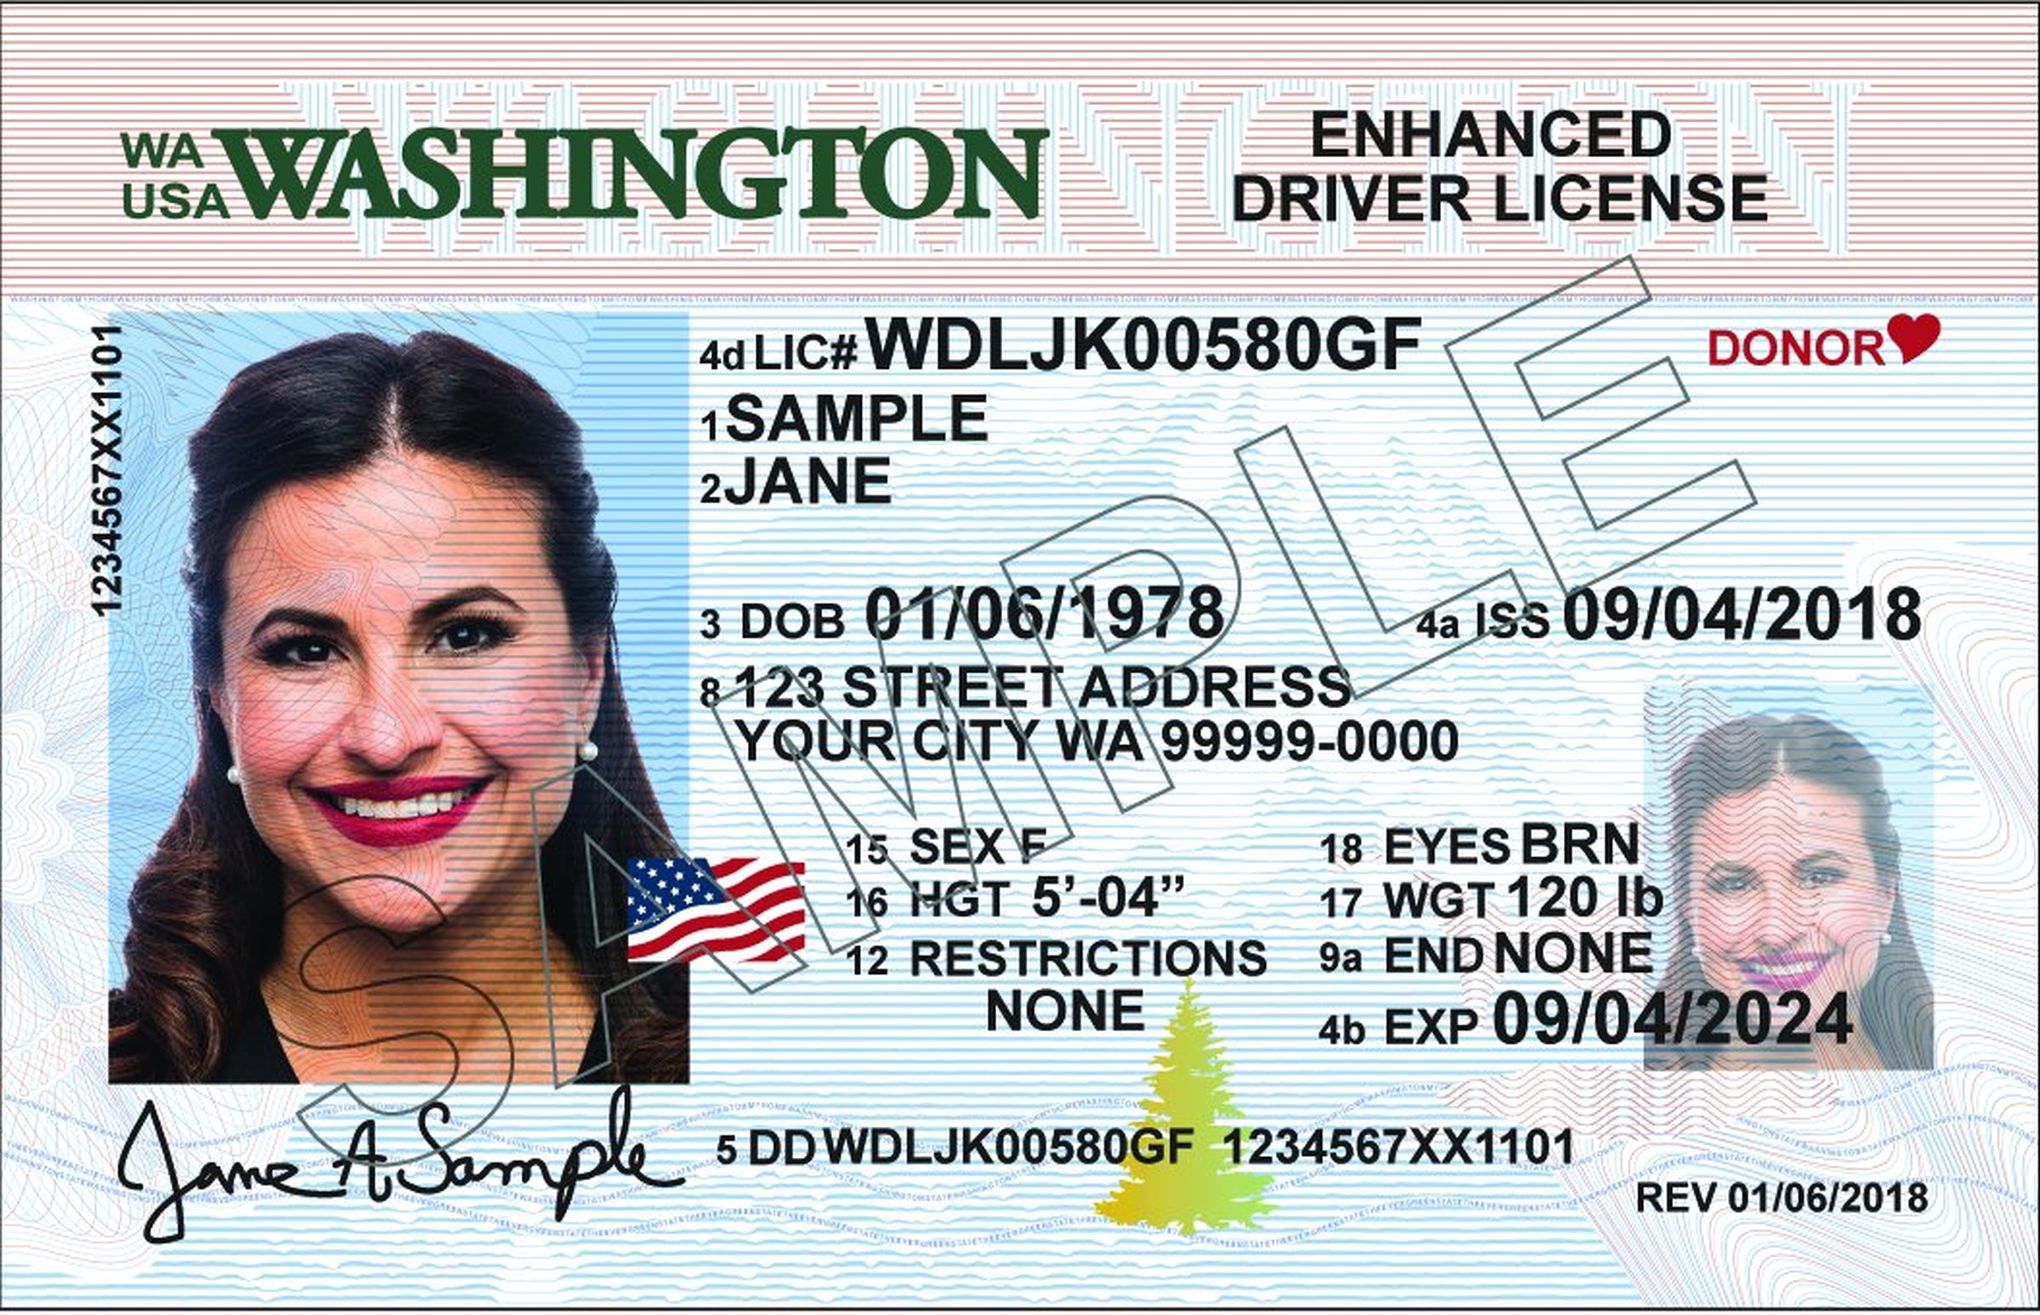 How Much is a License in Washington